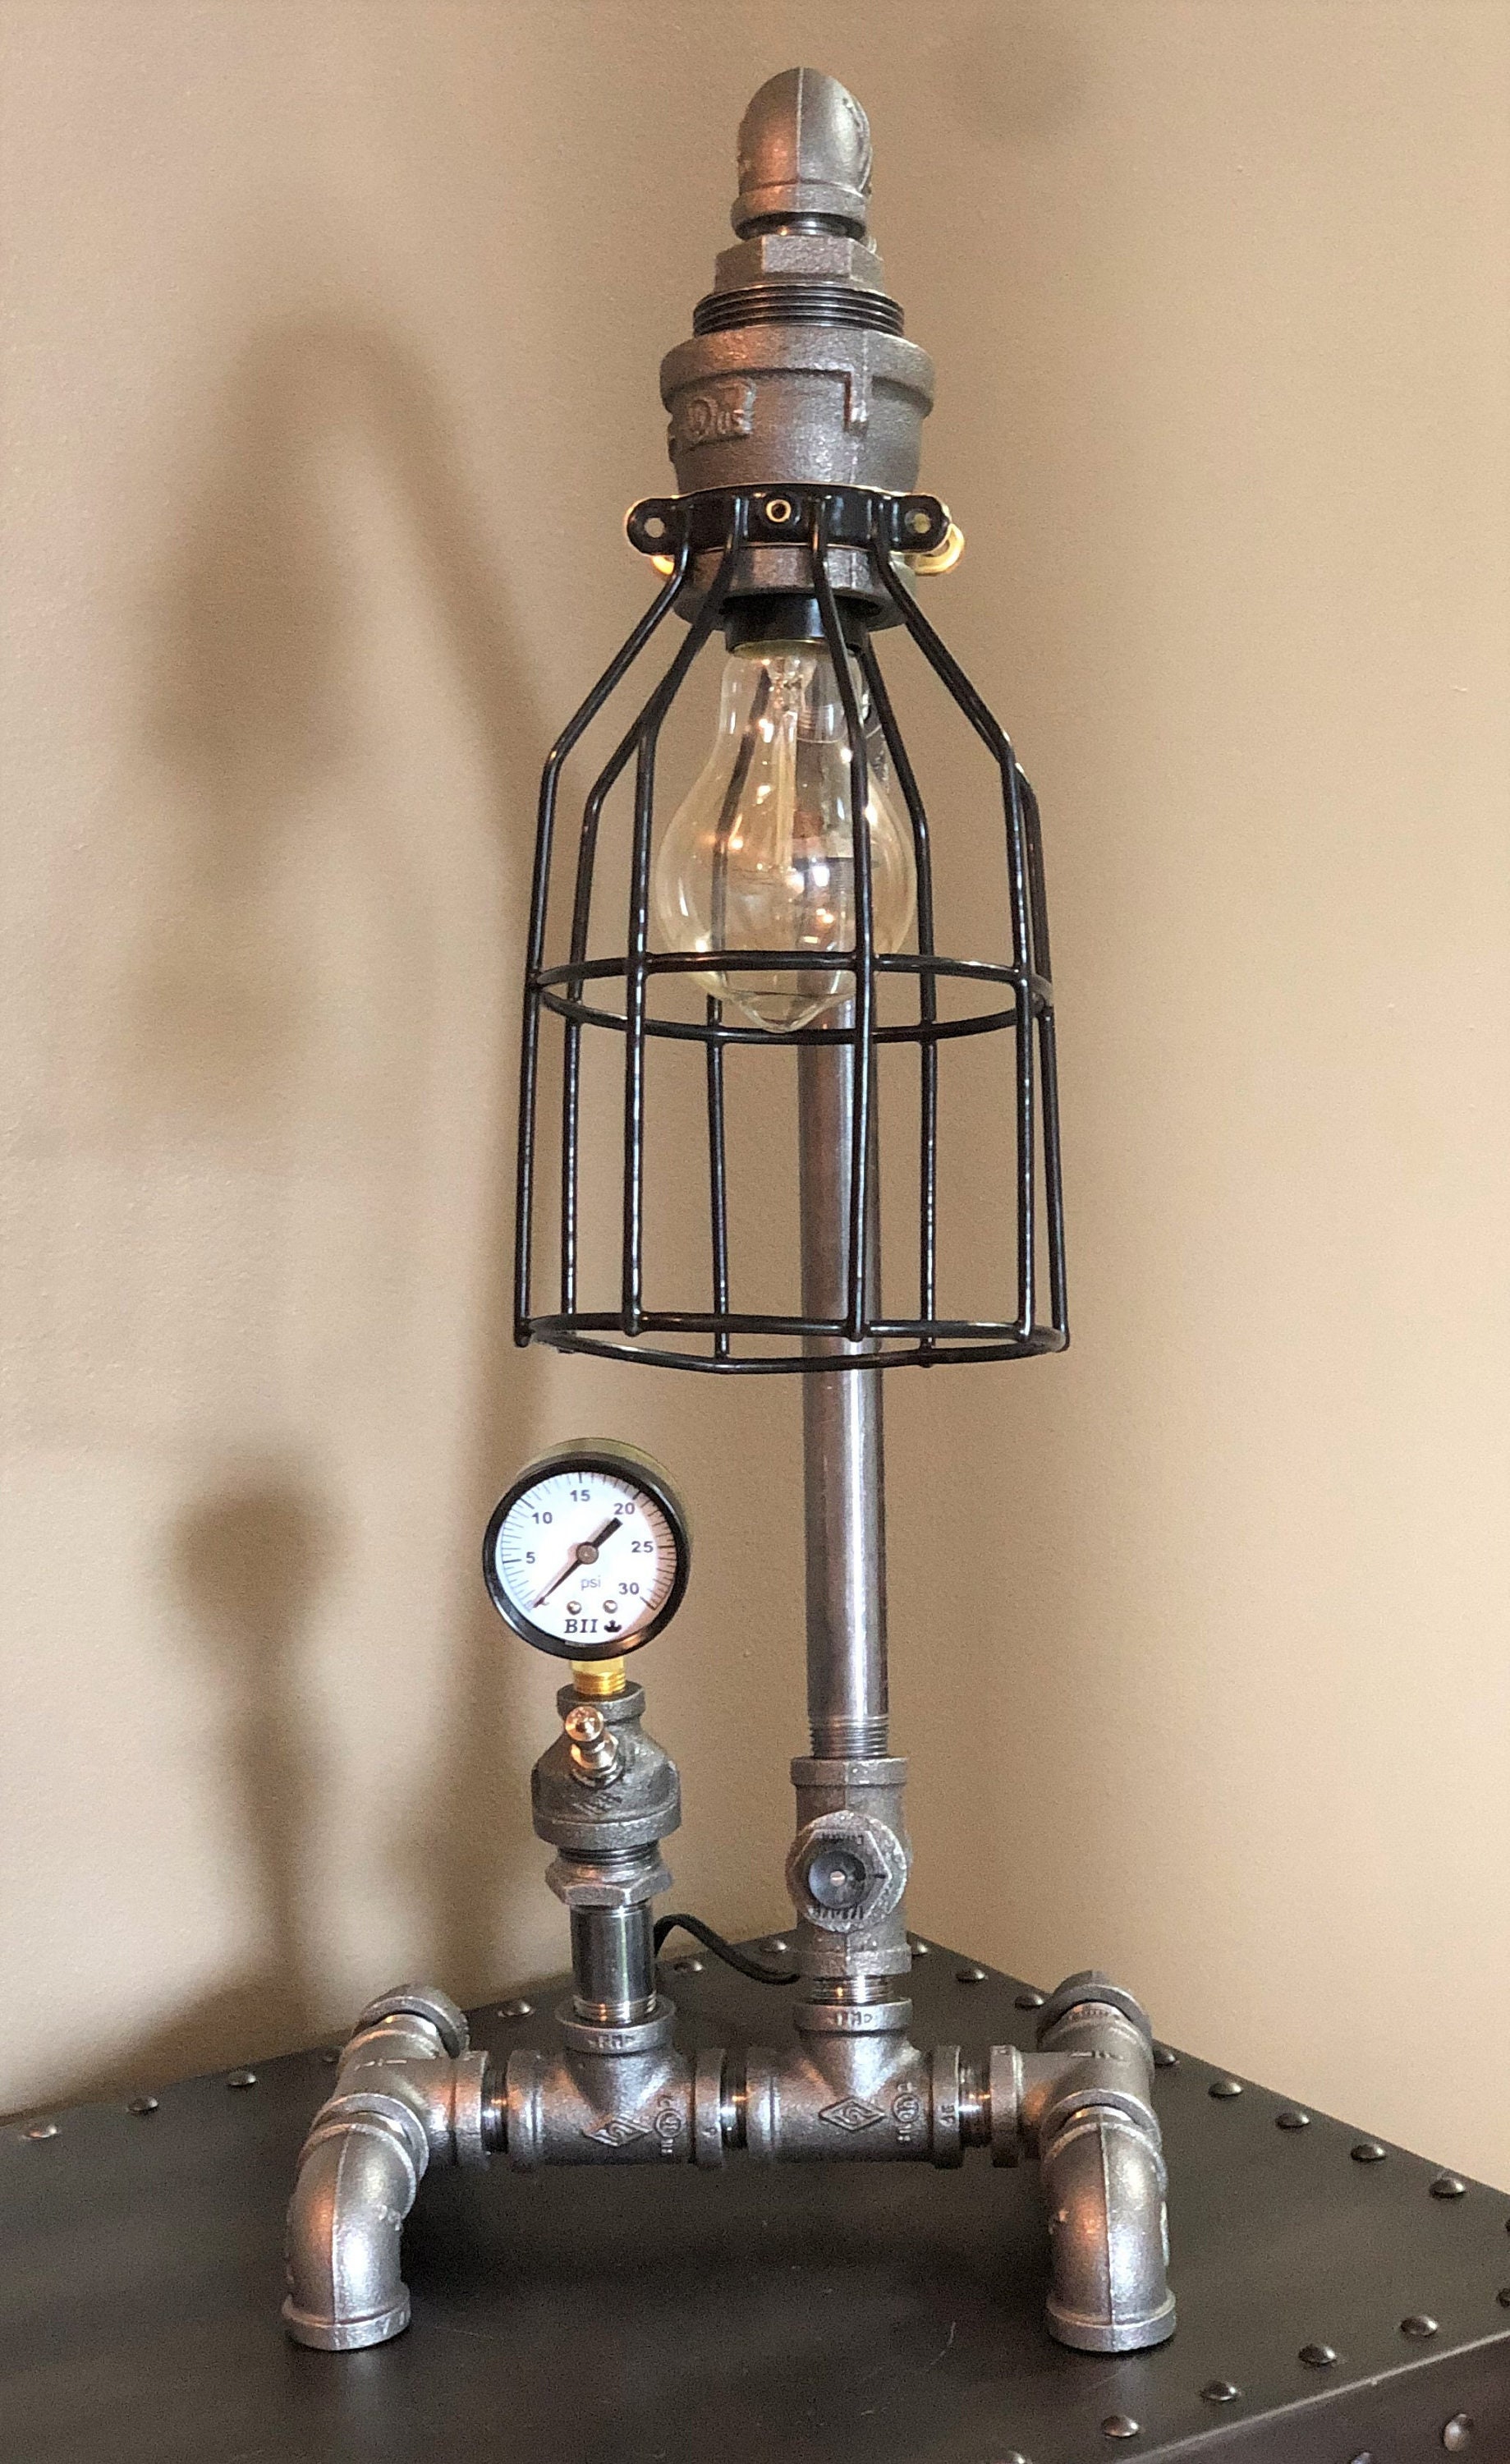 All lamps handmade in the U.S.A Black iron pipe cage lamp with FAUCET HANDLE DIMMER rustic cloth cord Industrial by the owner Lifetime Warranty! steampunk bulb included 